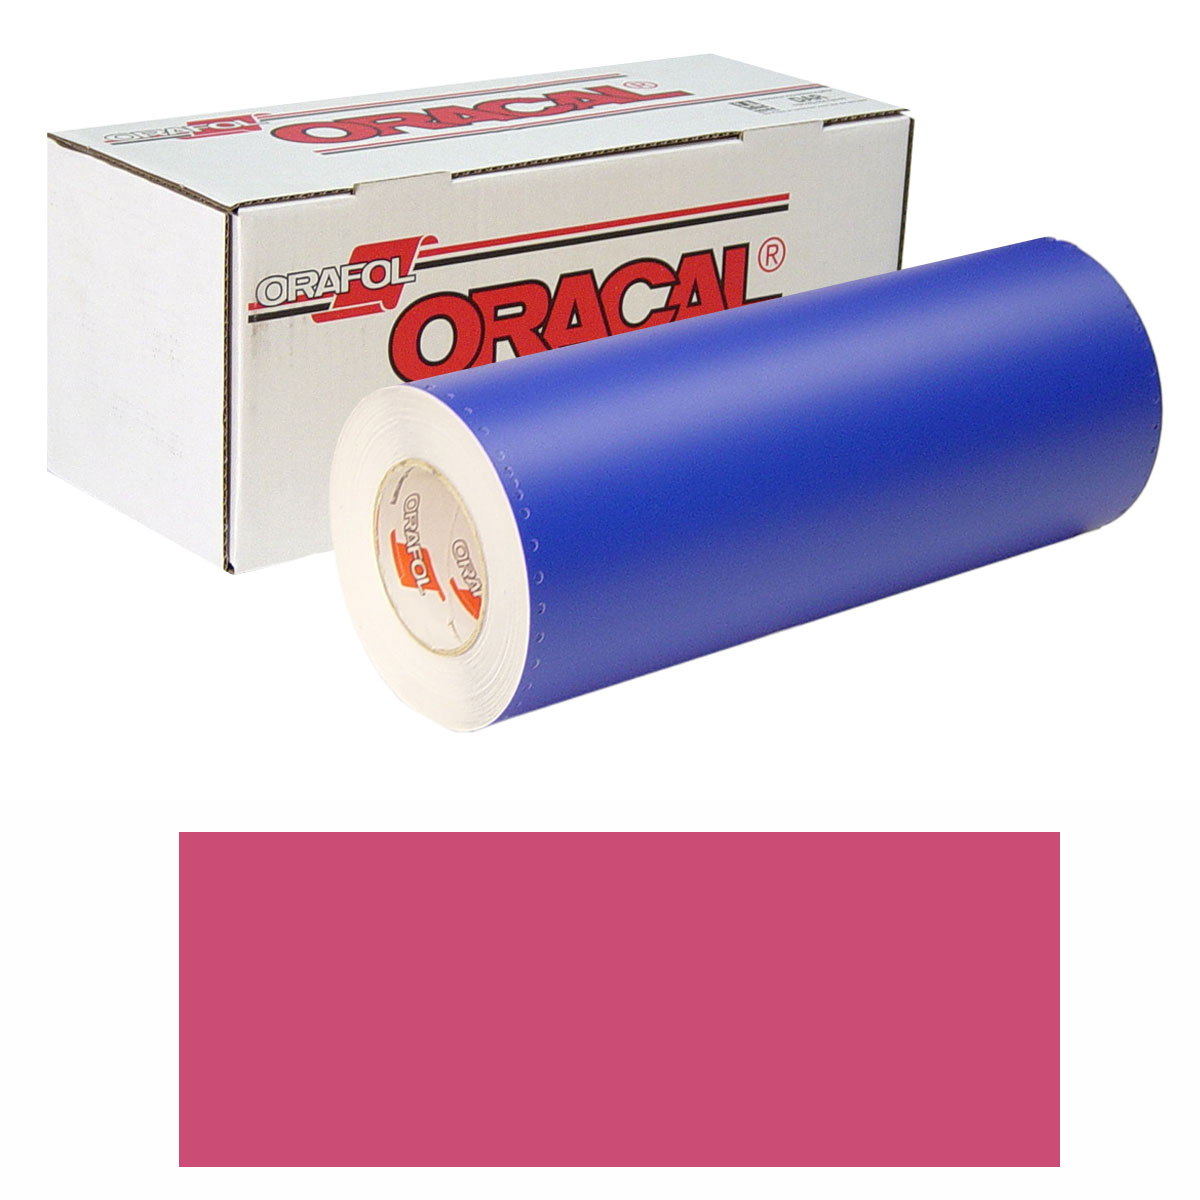 ORACAL 8300 30in X 50yd 031 Red